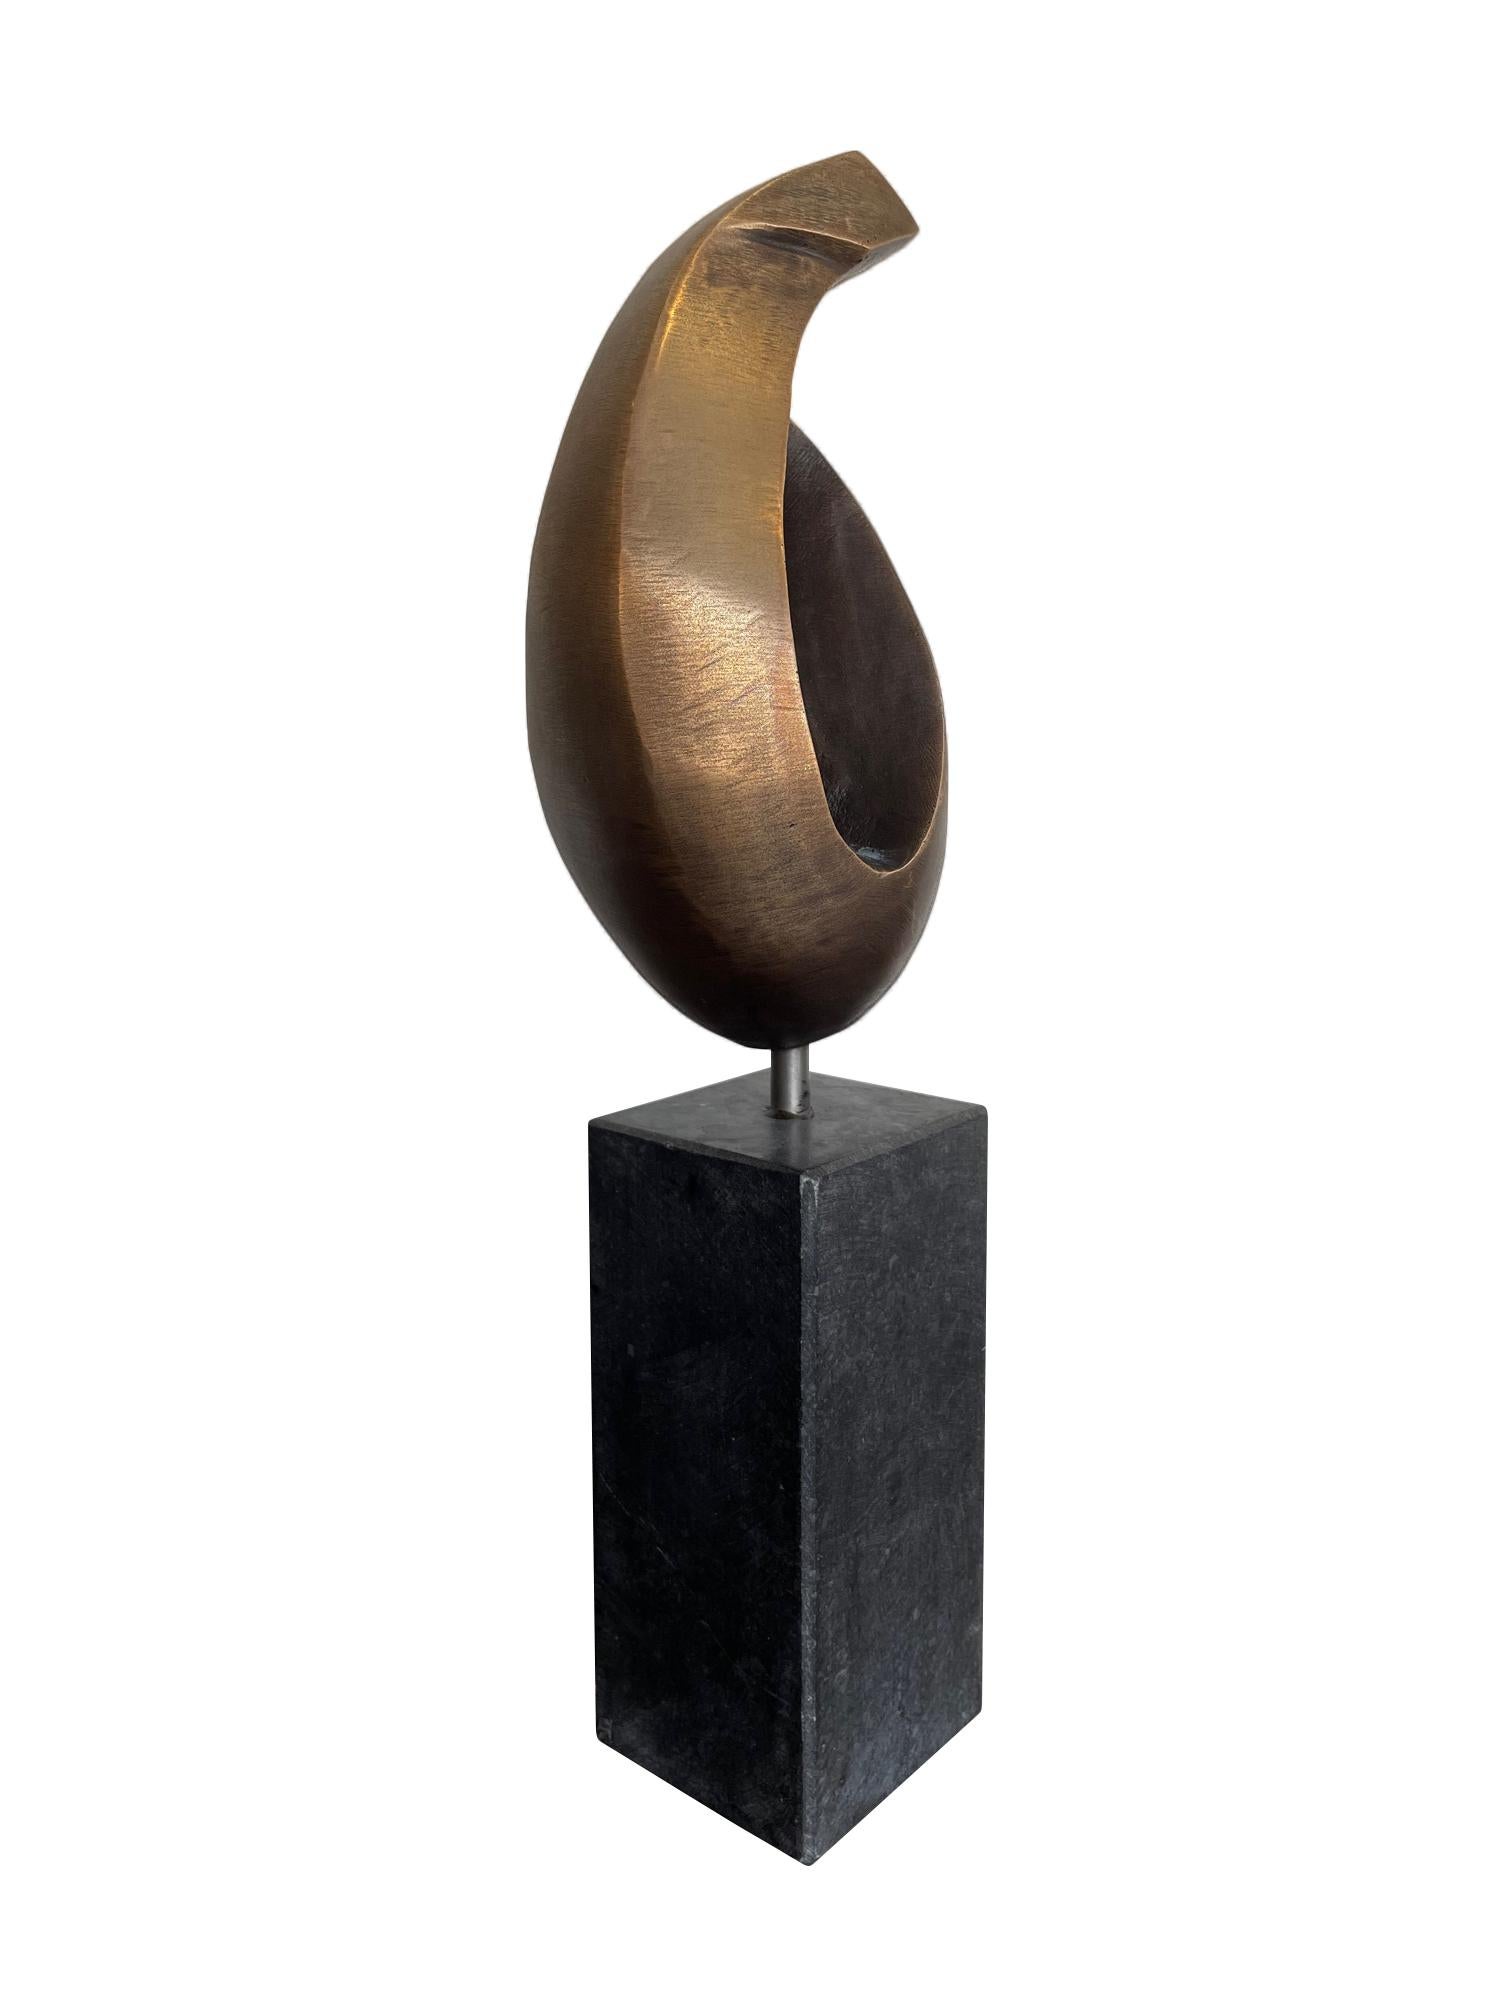 Mid-20th Century French Midcentury Abstract Bronze Sculpture Mounted on a Black Marble Plinth